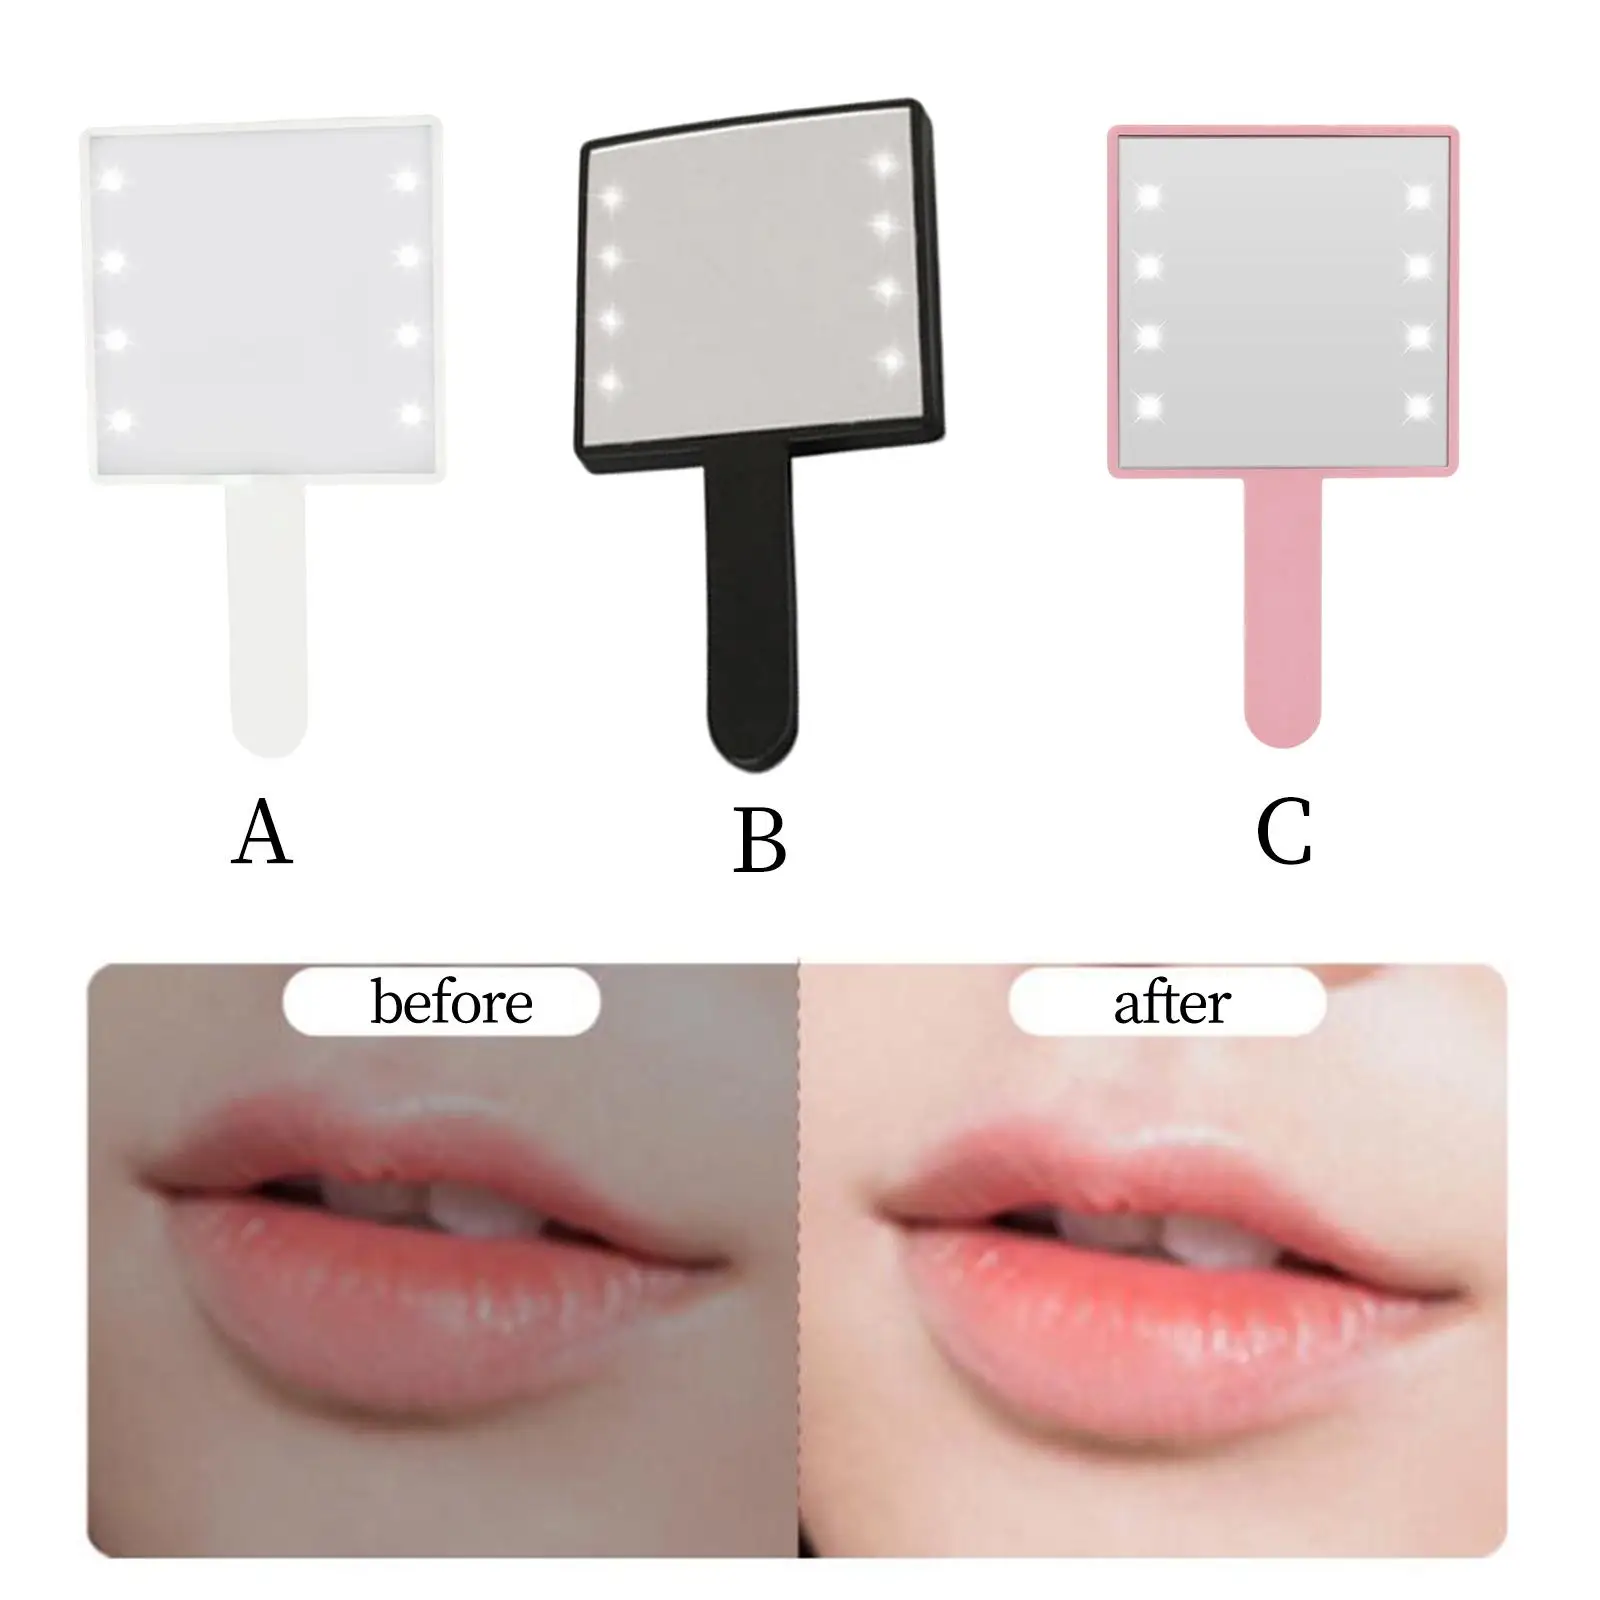 Makeup  Light, Gift for Woman, Vanity Mirror, Handheld Travel Makeup Mirror, Square Compact Portable, for Home